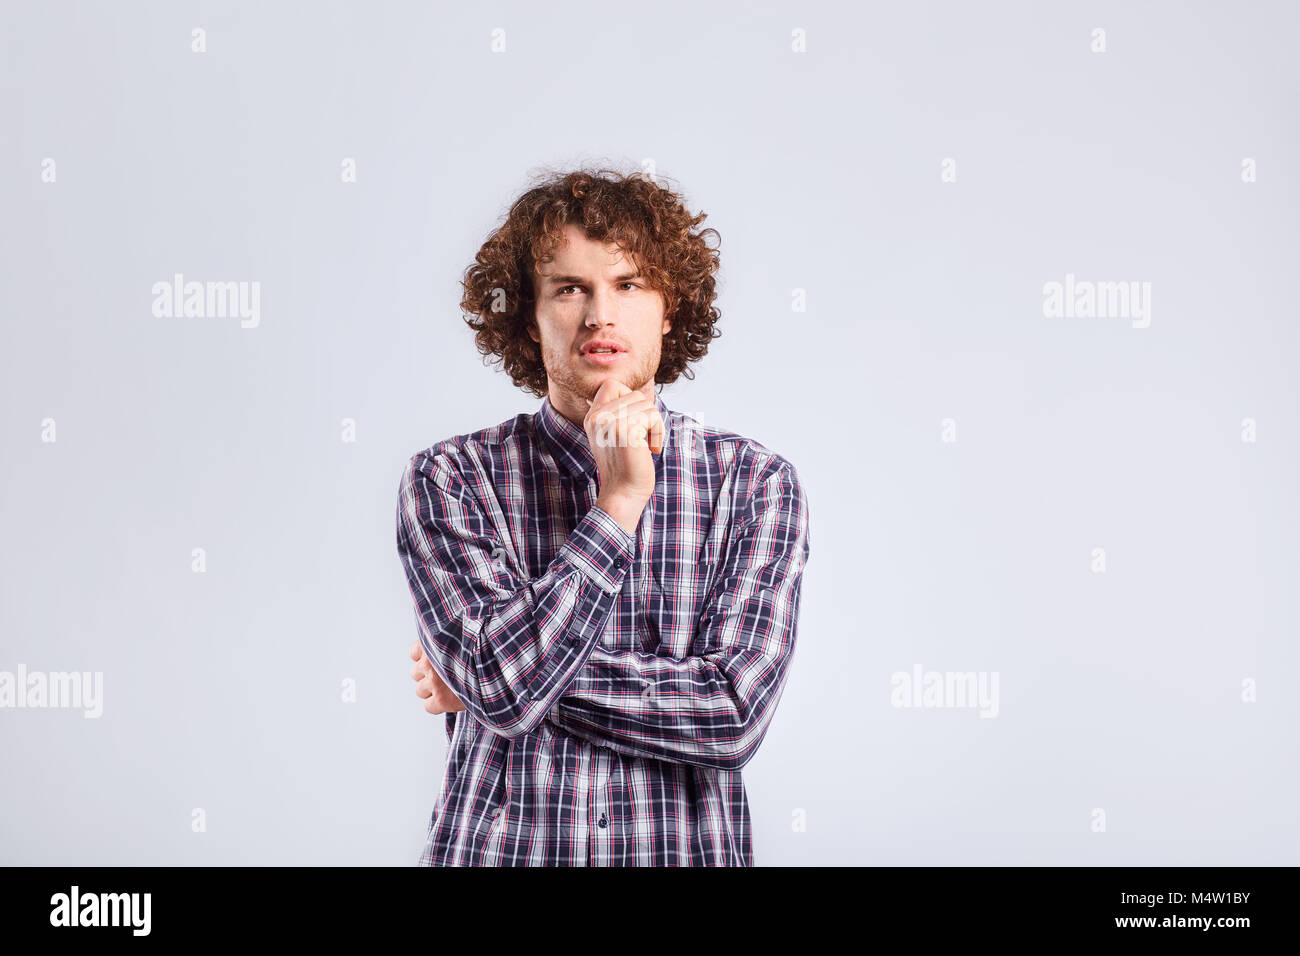 A young curly-haired man with a thoughtful emotion thinks lookin Stock Photo